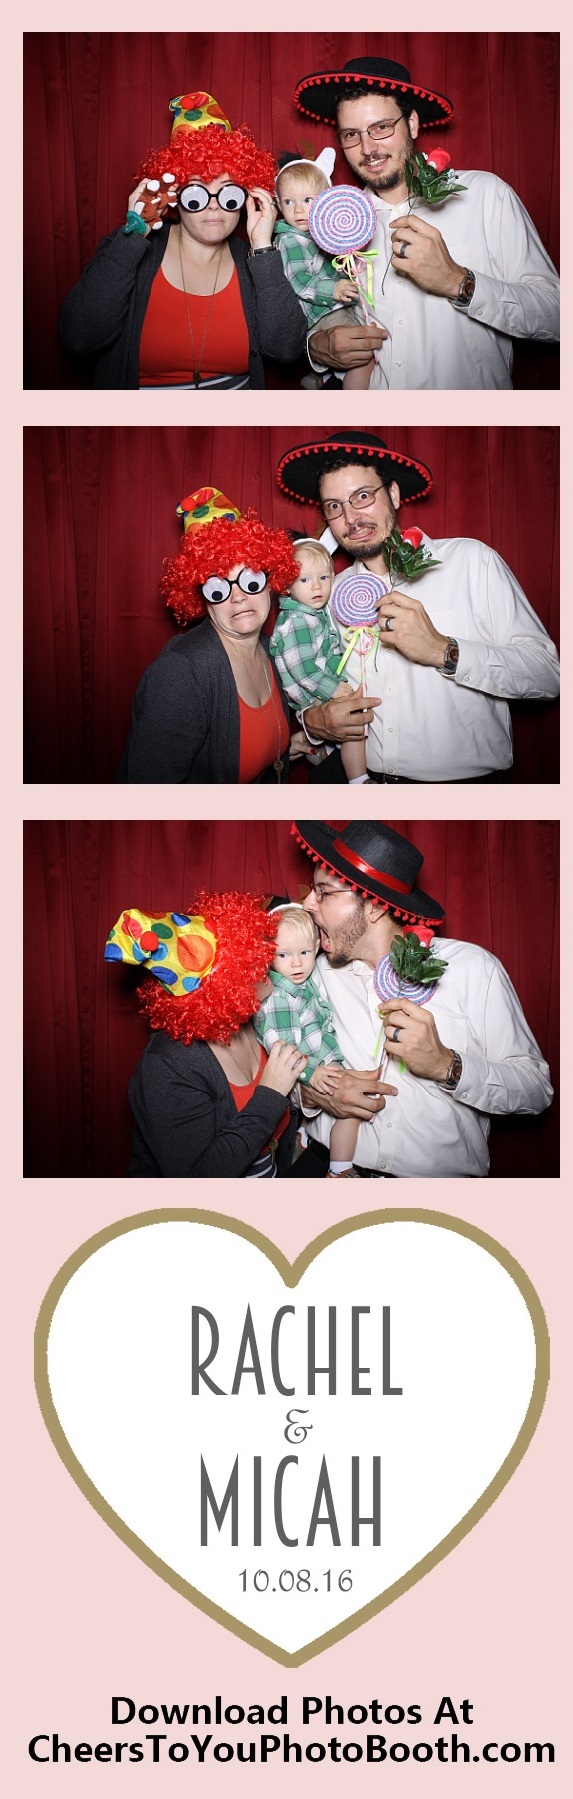 Cheers To You Photo Booth Rentals | Huntington Beach, CA | Template Design Examples